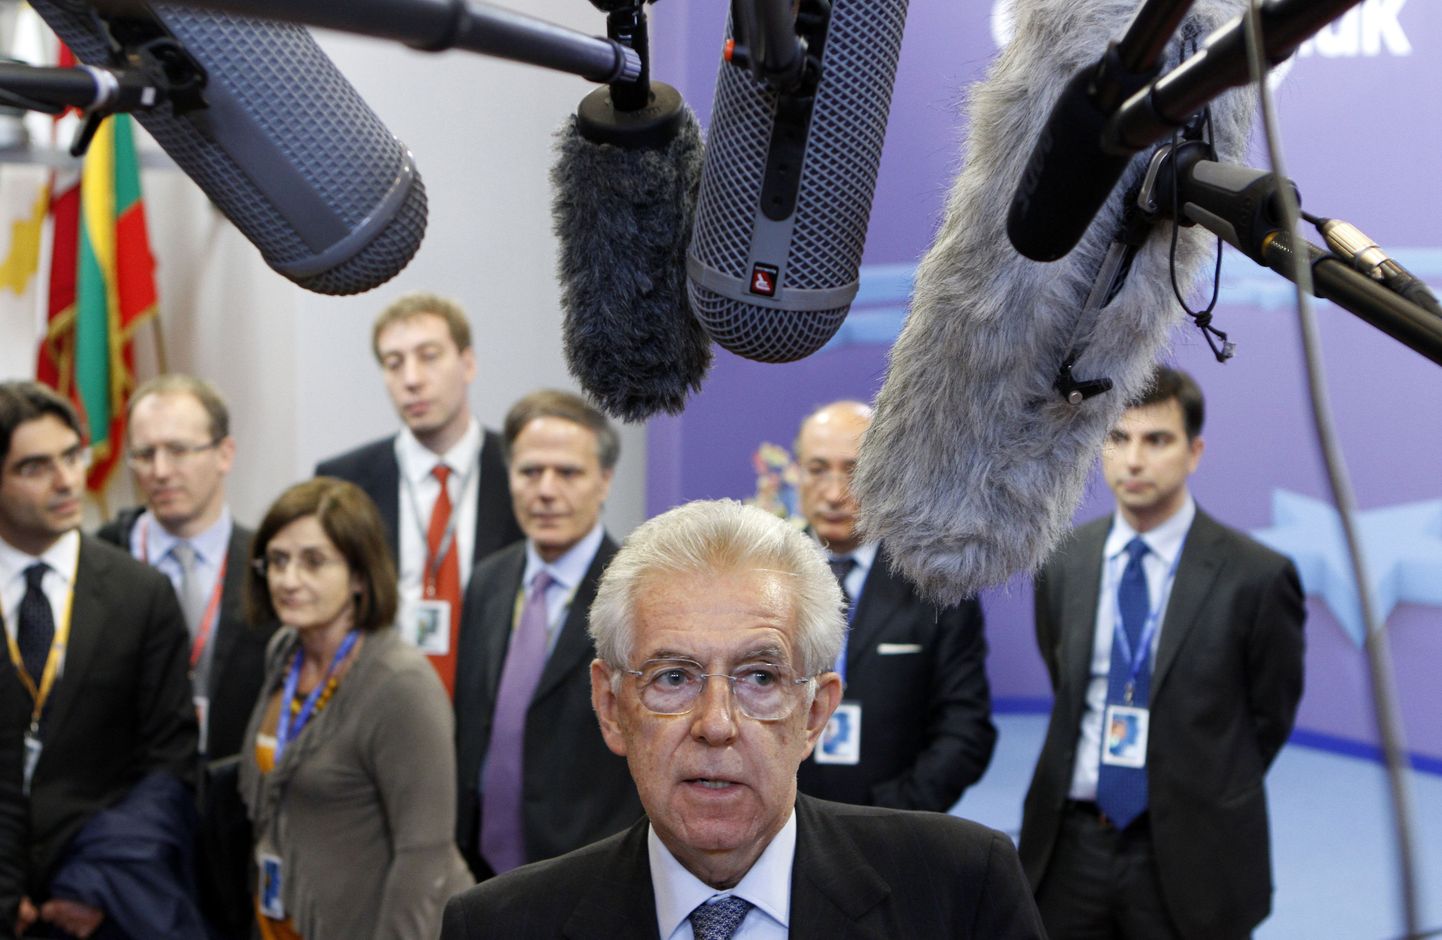 Italy's Prime Minister Mario Monti attends an interview as he leaves a two-day European Union leaders summit in Brussels early June 29, 2012.  REUTERS/Sebastien Pirlet (BELGIUM  - Tags: POLITICS BUSINESS)